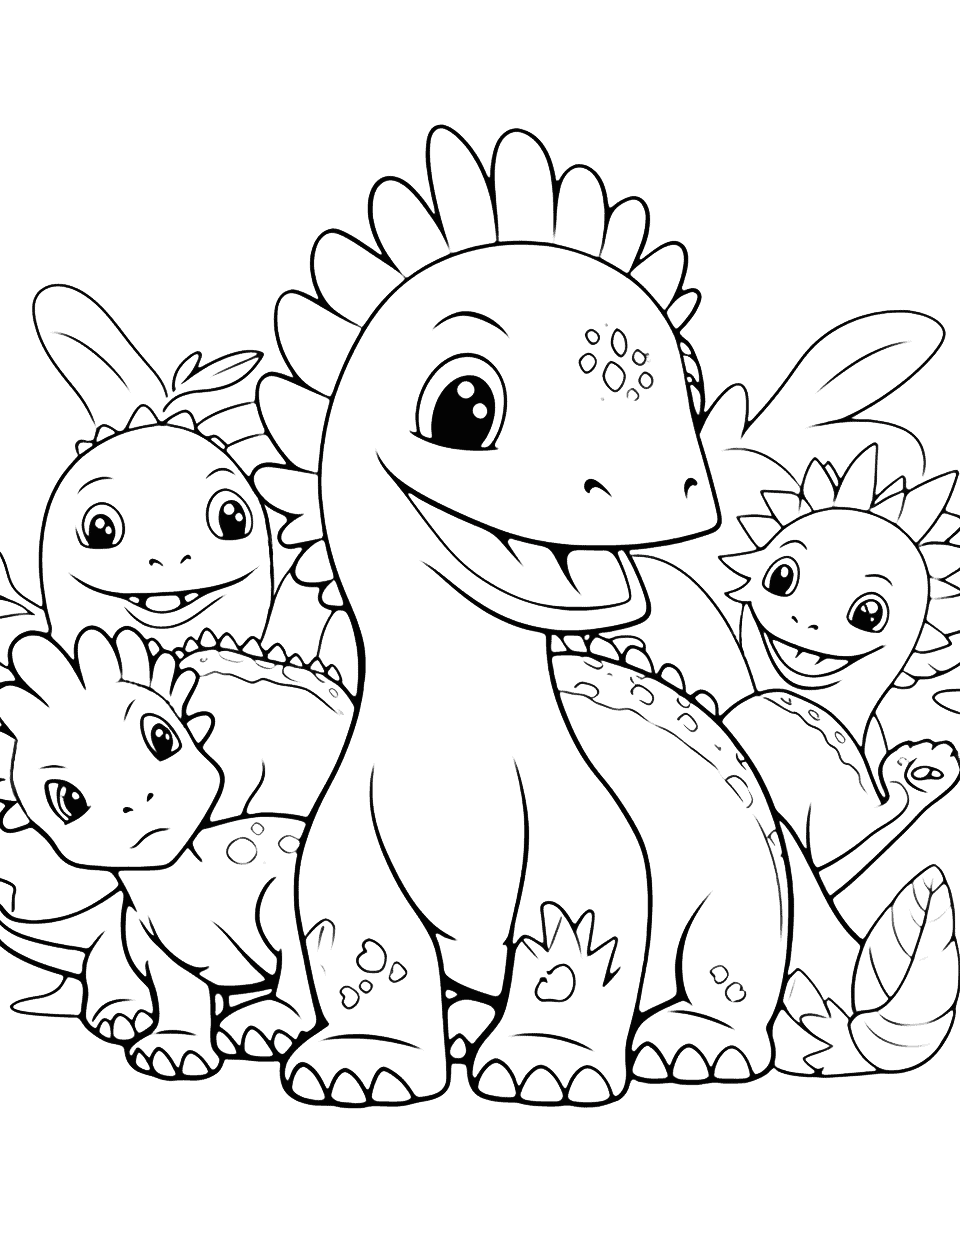 Cute Baby Dinosaurs Coloring Page - A collection of adorable baby dinosaurs playing together.